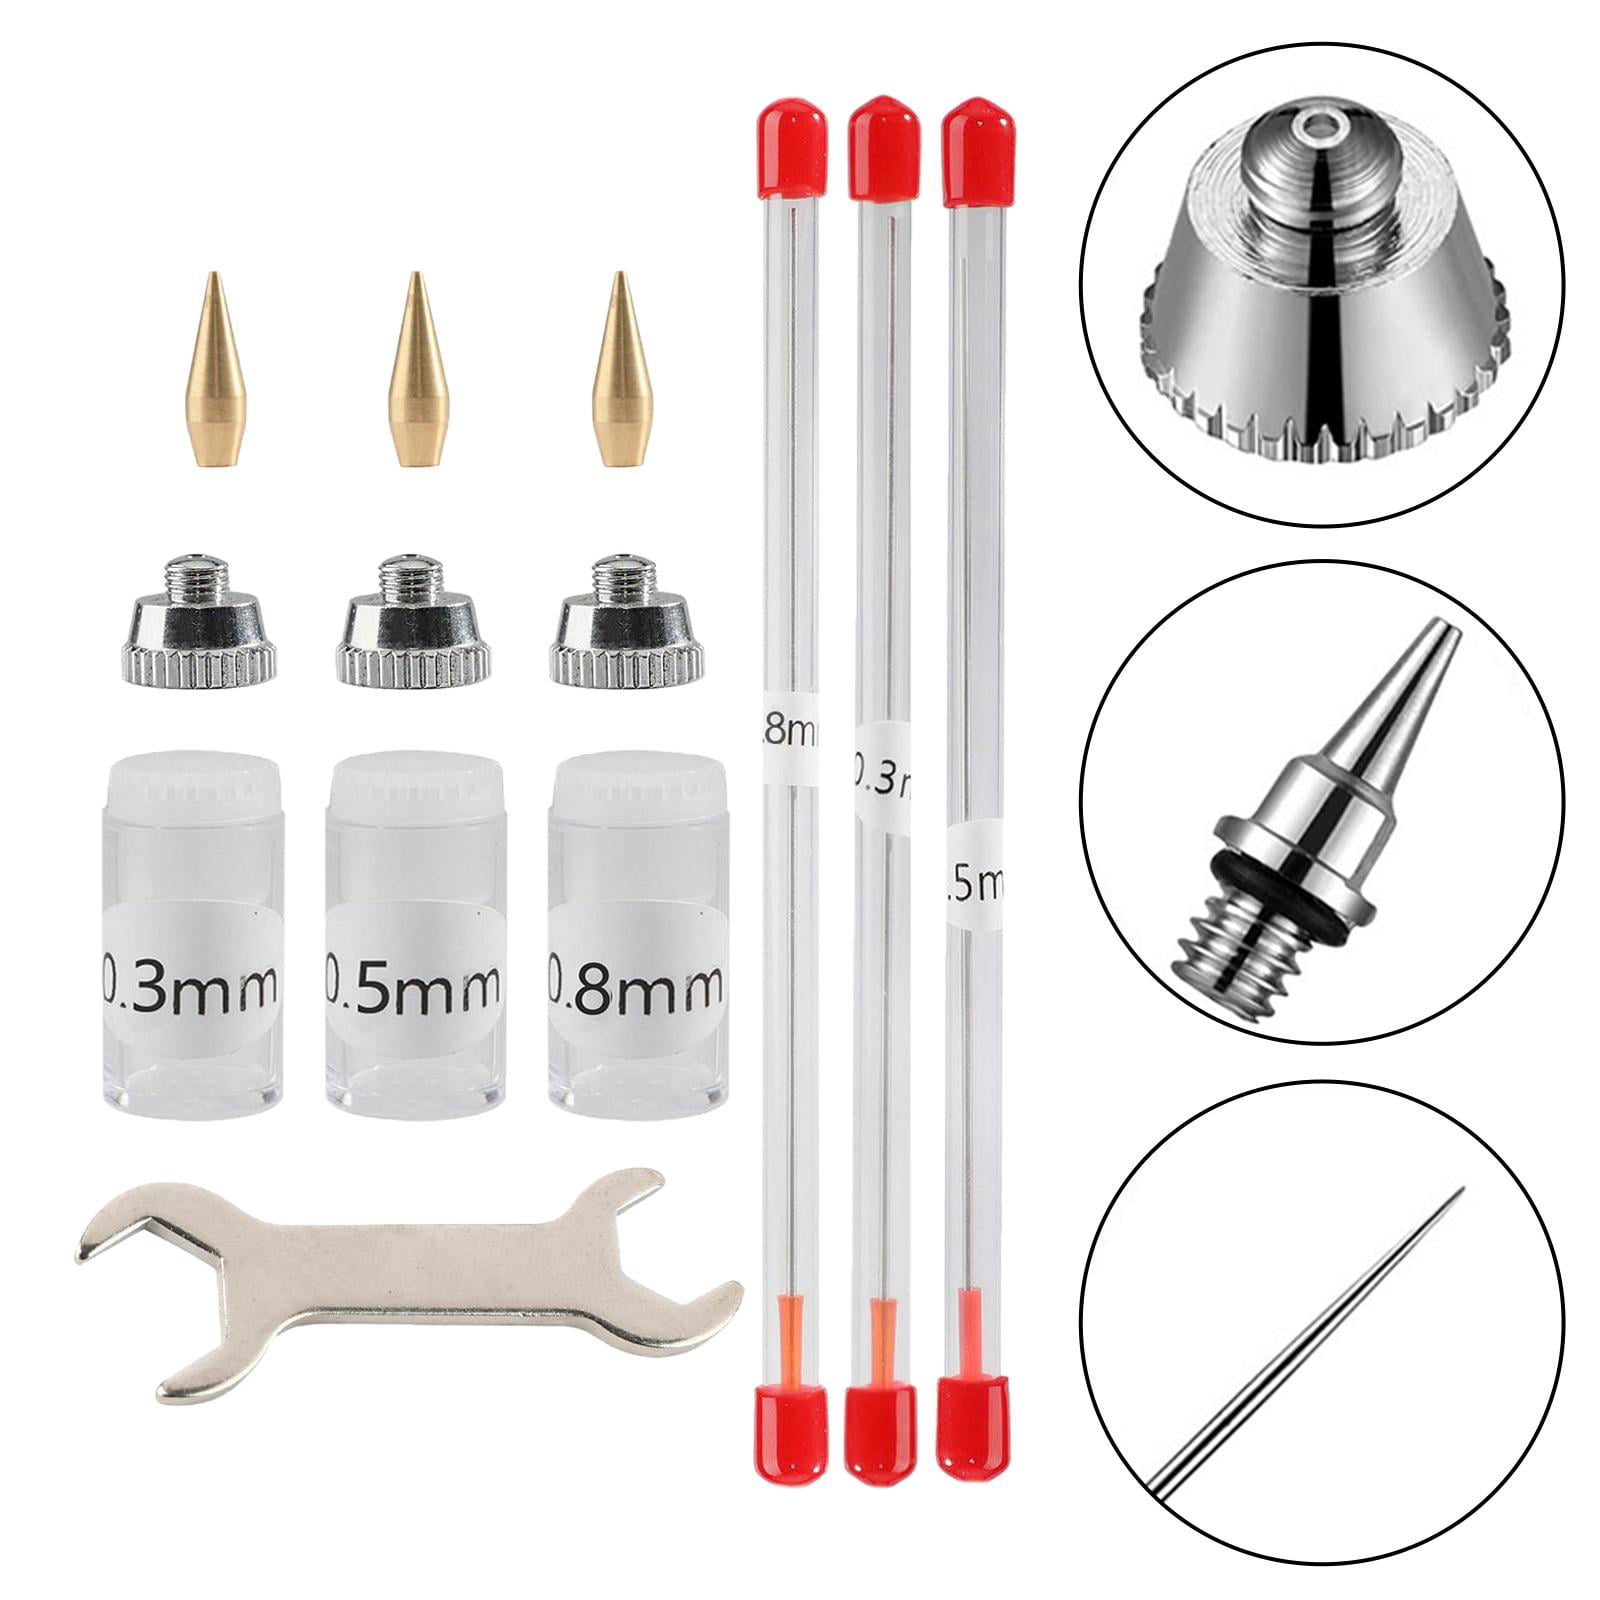 21 Pieces Airbrush Nozzle Cap Kit Airbrush Needle Replacement Parts  Airbrush Needles with Wrench and Airbrush Cleaning Kit Replacement Part for  Airbrush Sprayer Accessories 0.2/0.3/0.5 mm